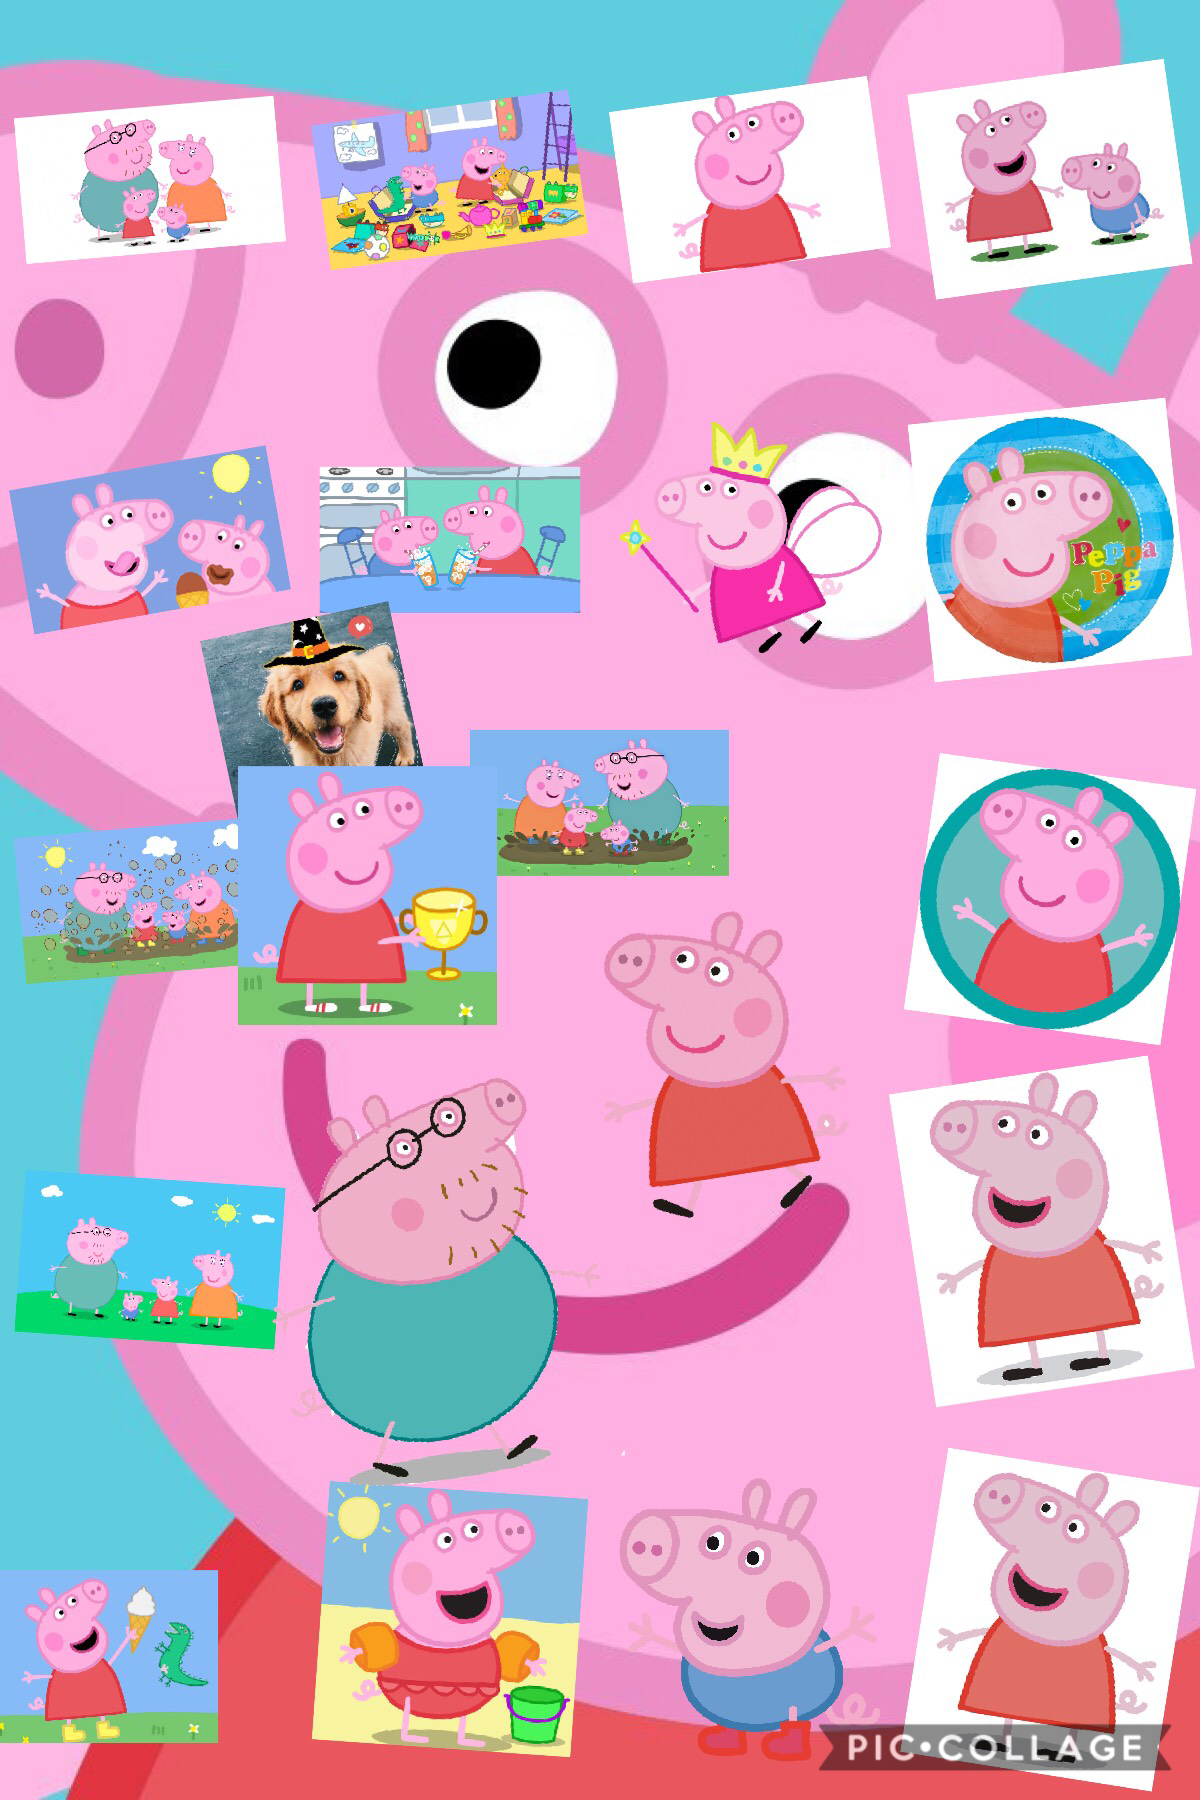 If you can find the one pic that’s different from peppa u will follow you and like all of your posts 
(Only first 5 people) day what it is in comments or a different post or do a remix and circle it  